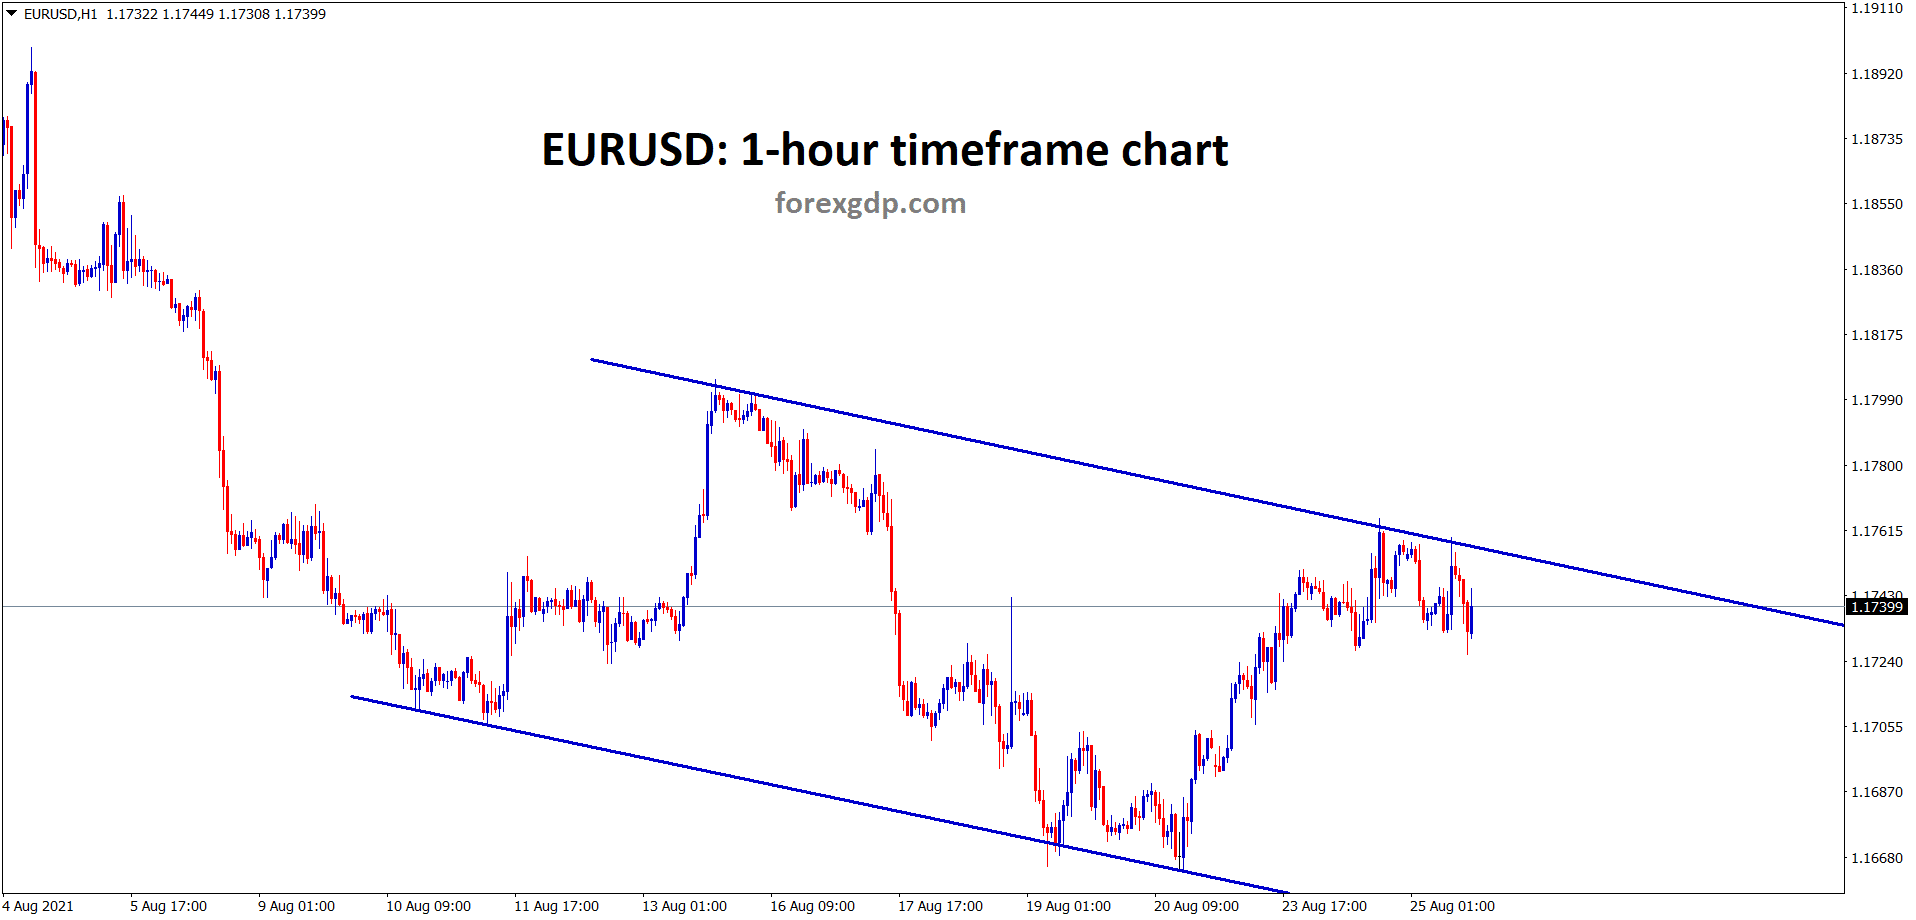 EURUSD is consolidating at the lower high area of the minor descending channel